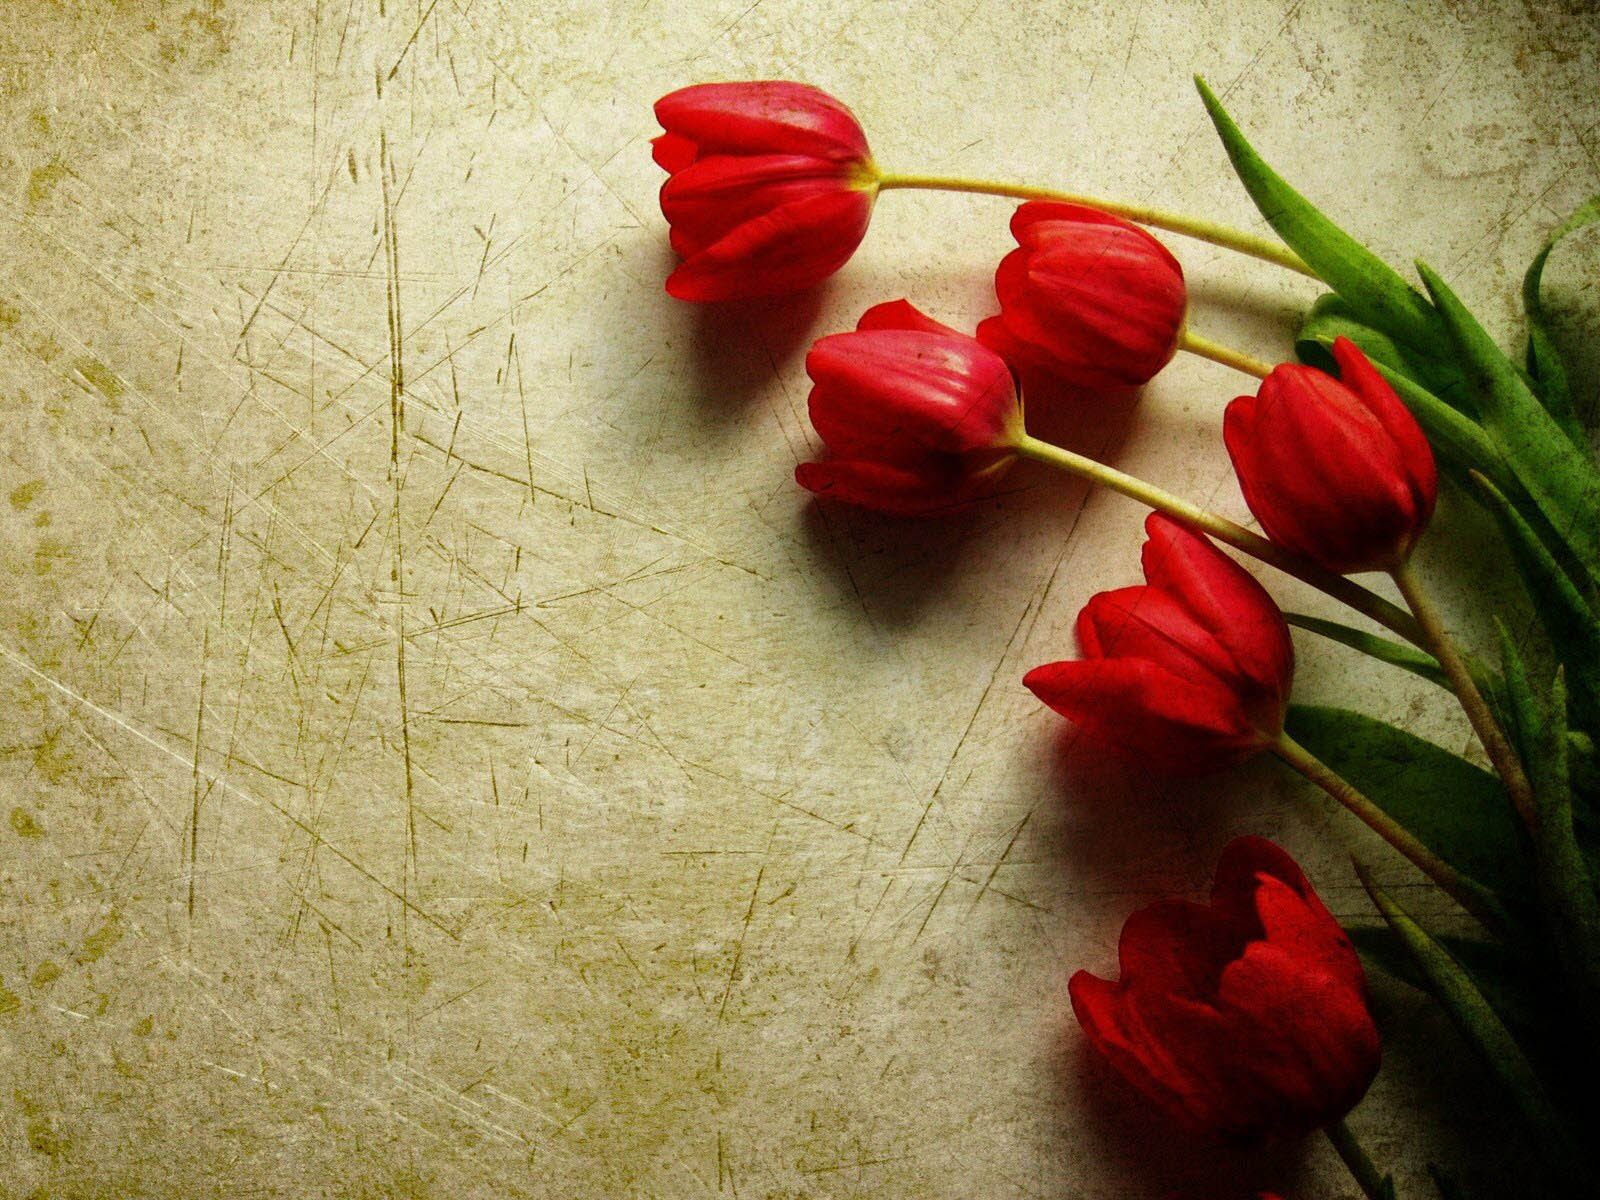 Tag Red Tulips Wallpaper Image Photos Pictures And Background